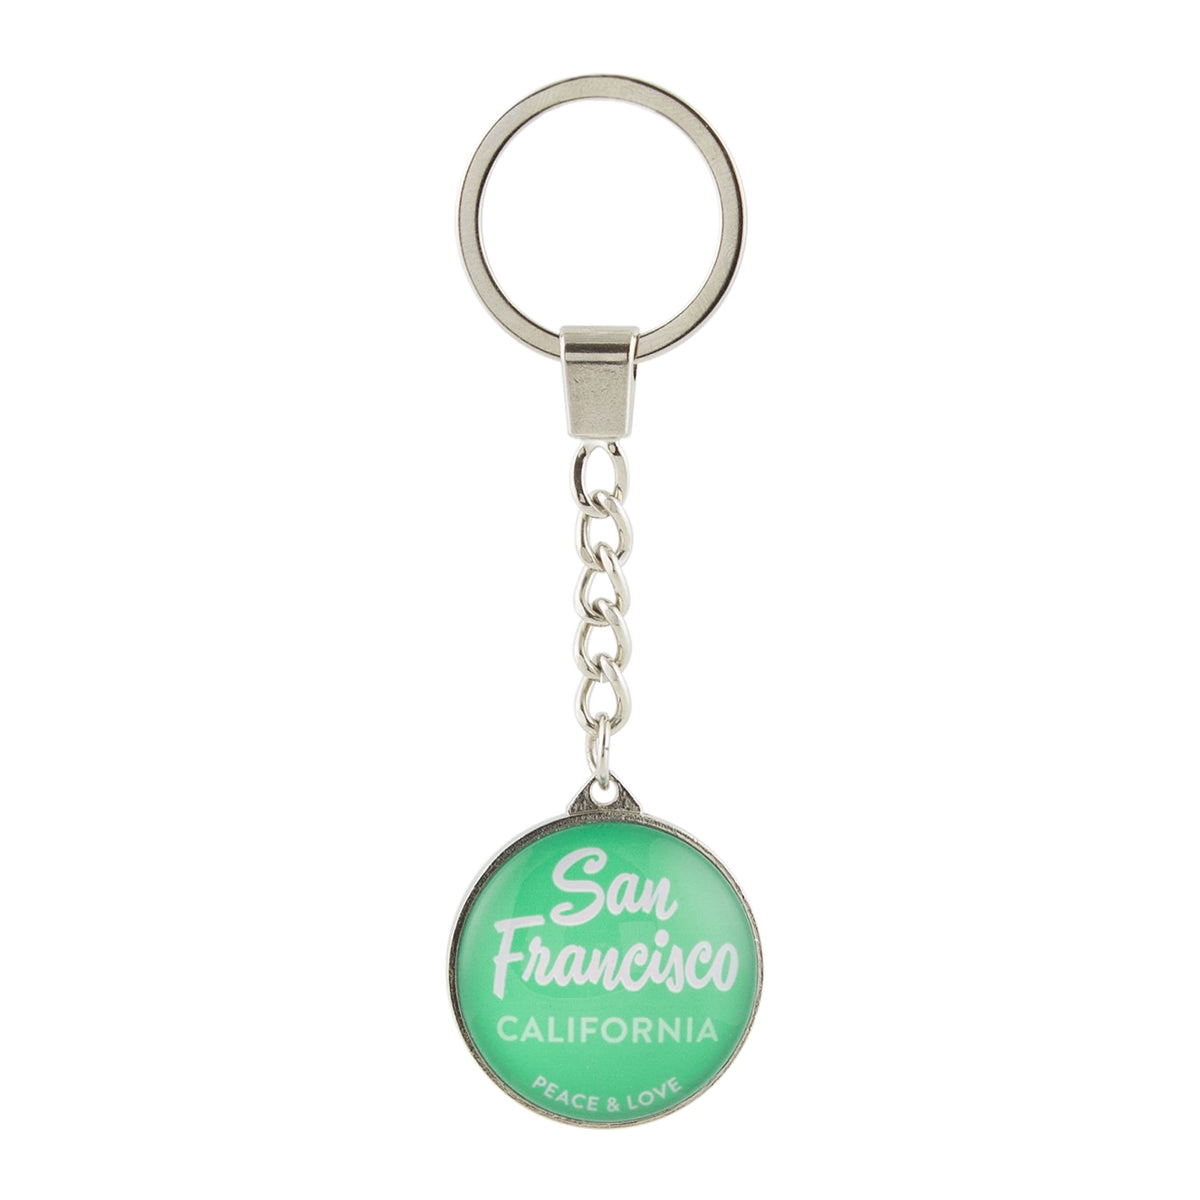 Souvenir crystal keychain with text "San Francisco California Peace & Love" in white on teal green background.